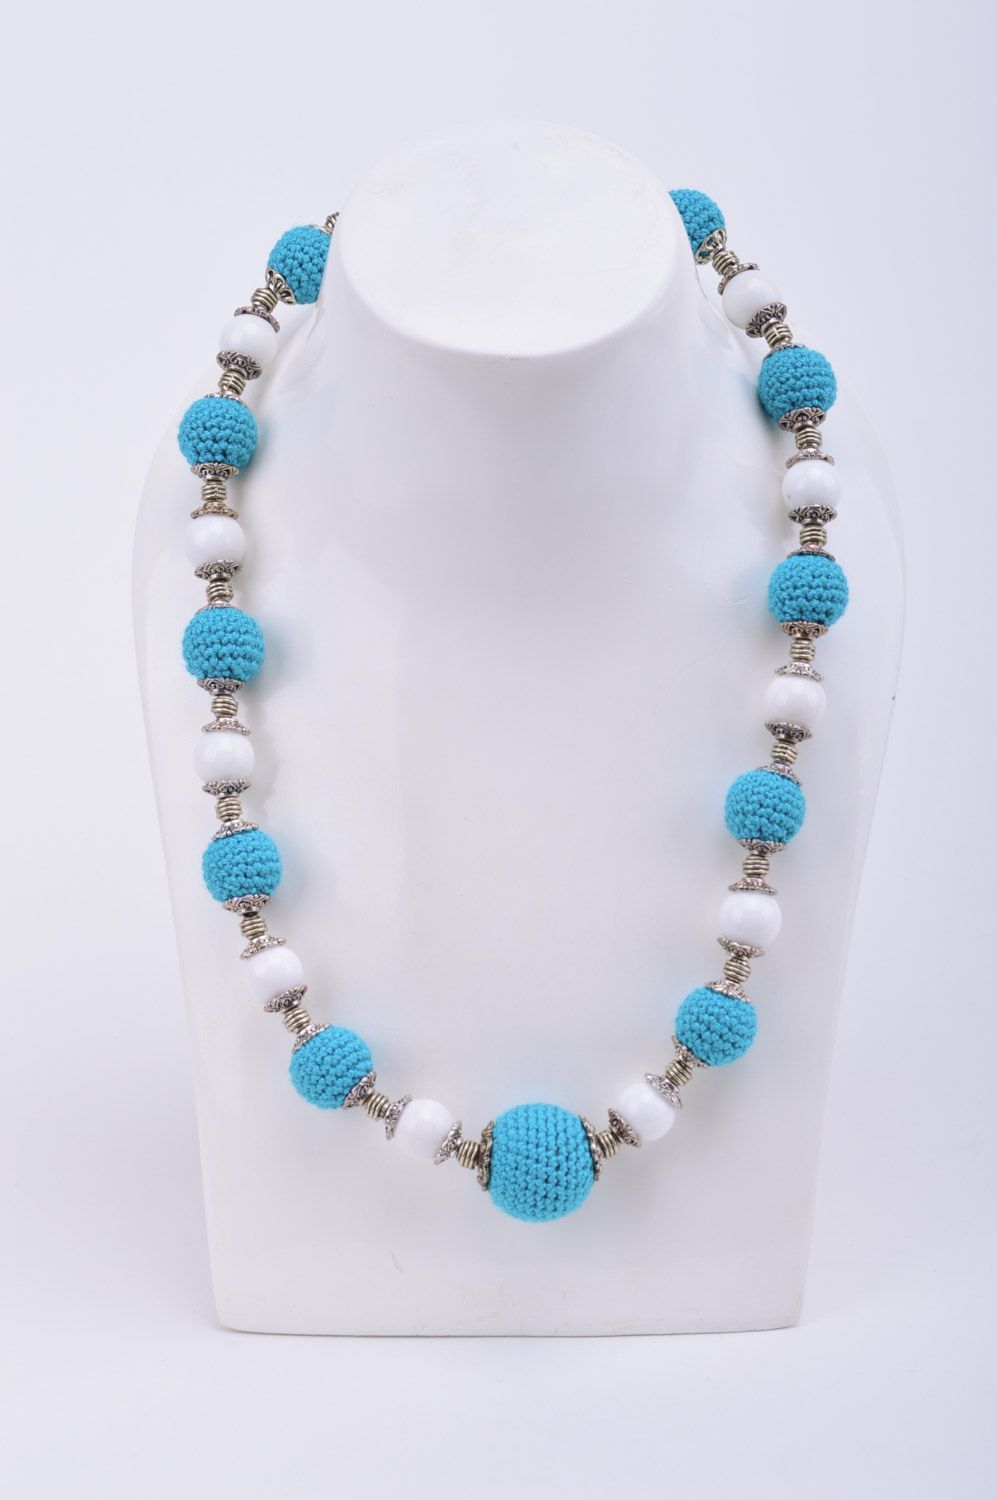 Handmade designer women's white and blue necklace with crochet over beads photo 1